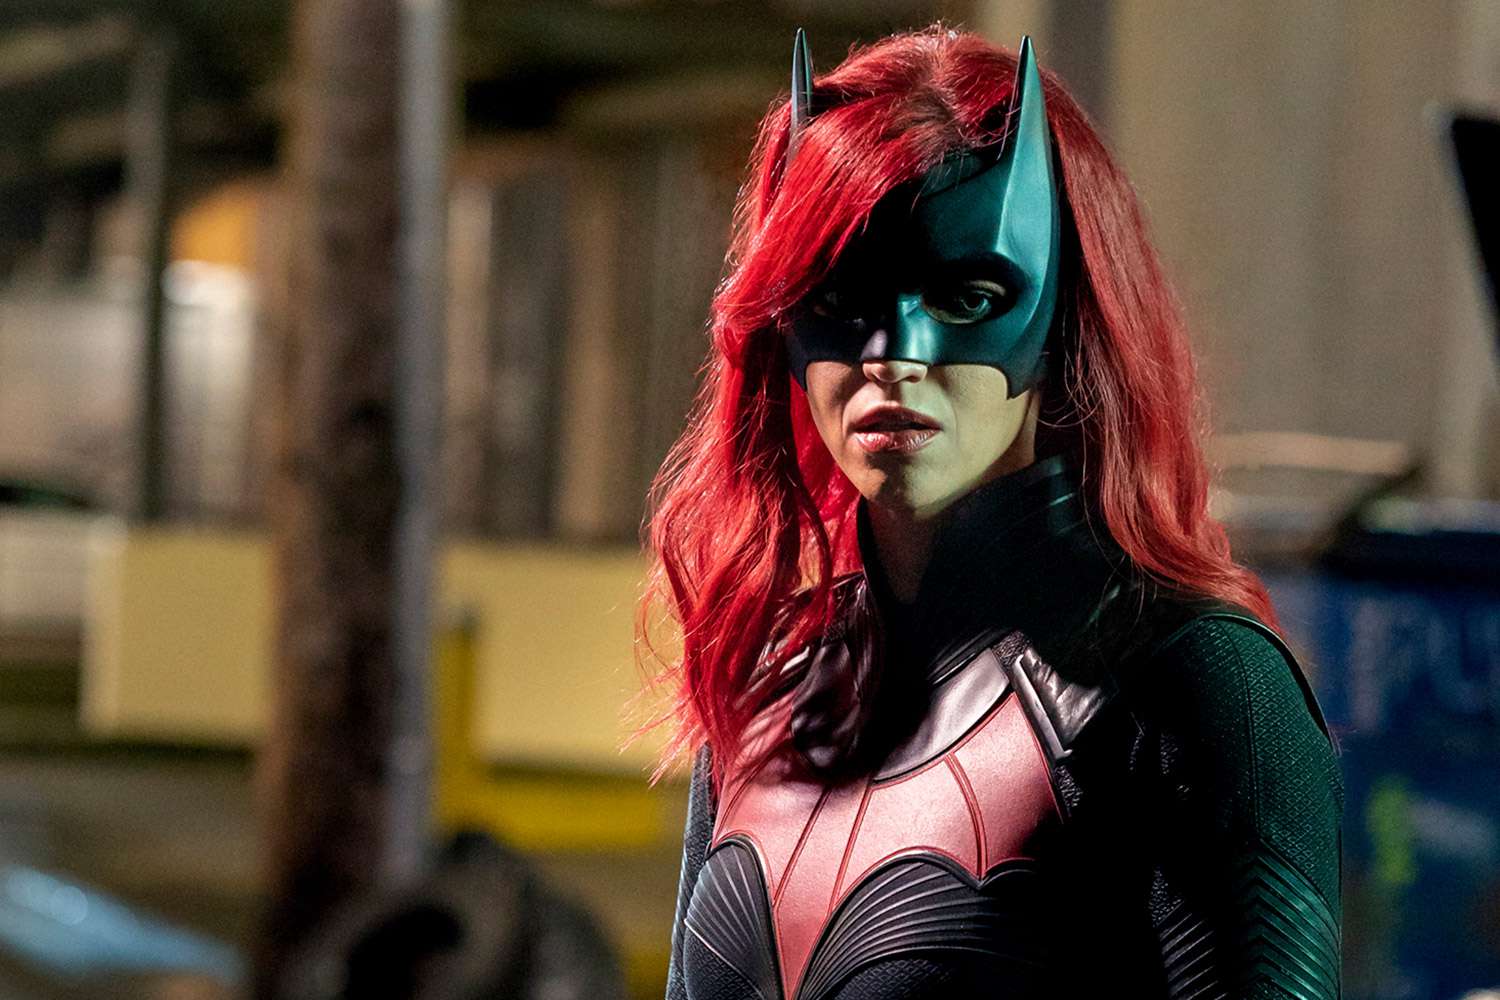 Ruby Rose shares details about her decision to leave Batwoman | EW.com